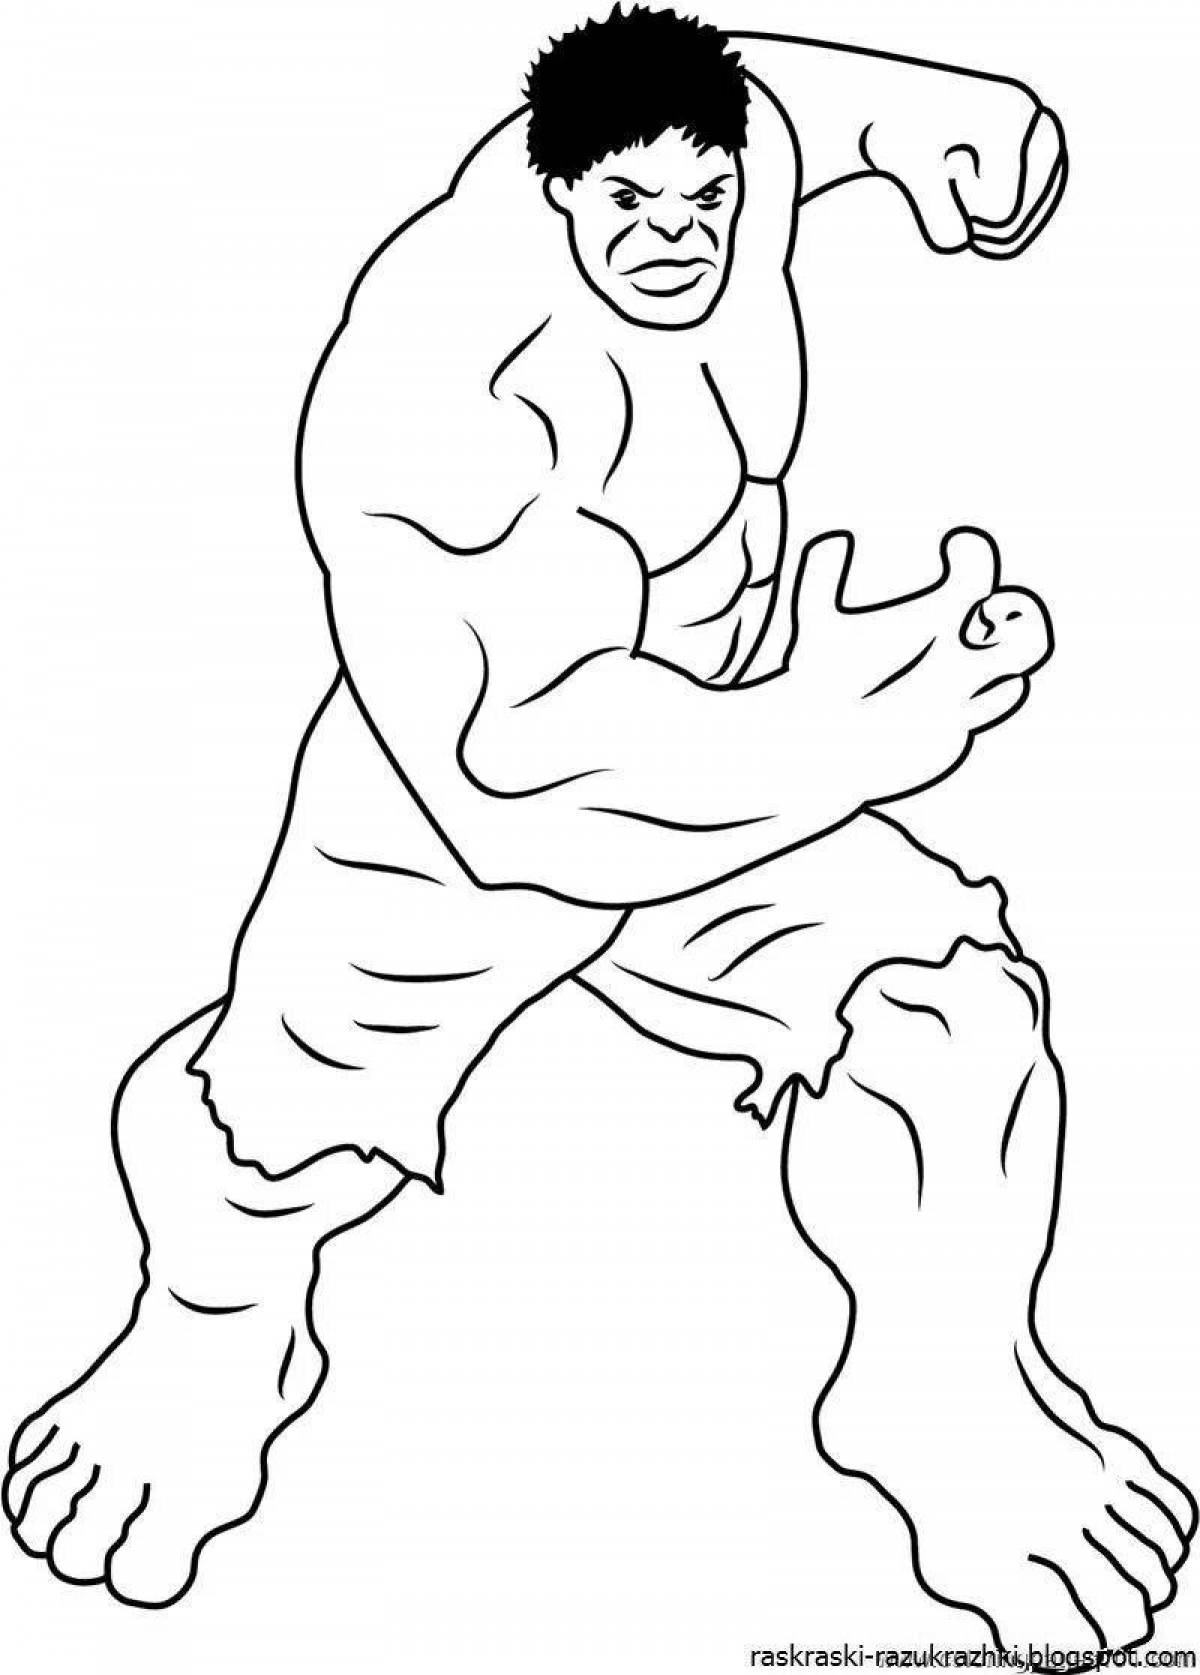 Outstanding hulk coloring page